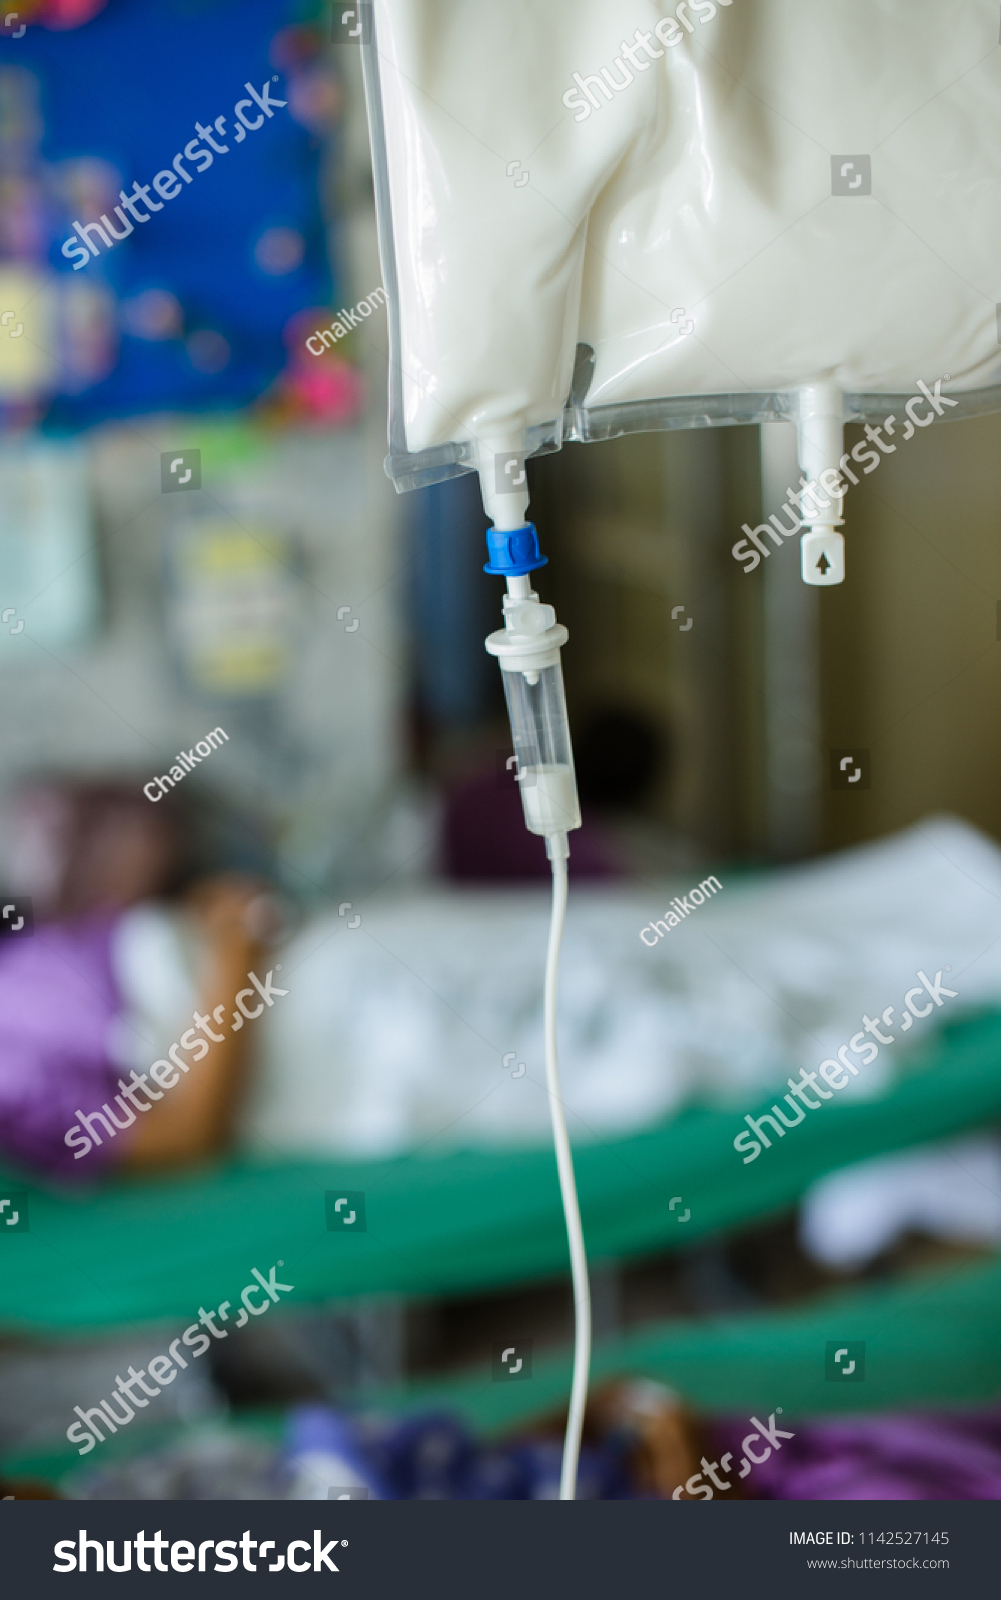  Patient  with Total Parenteral Nutrition (TPN) in hospital.  #1142527145